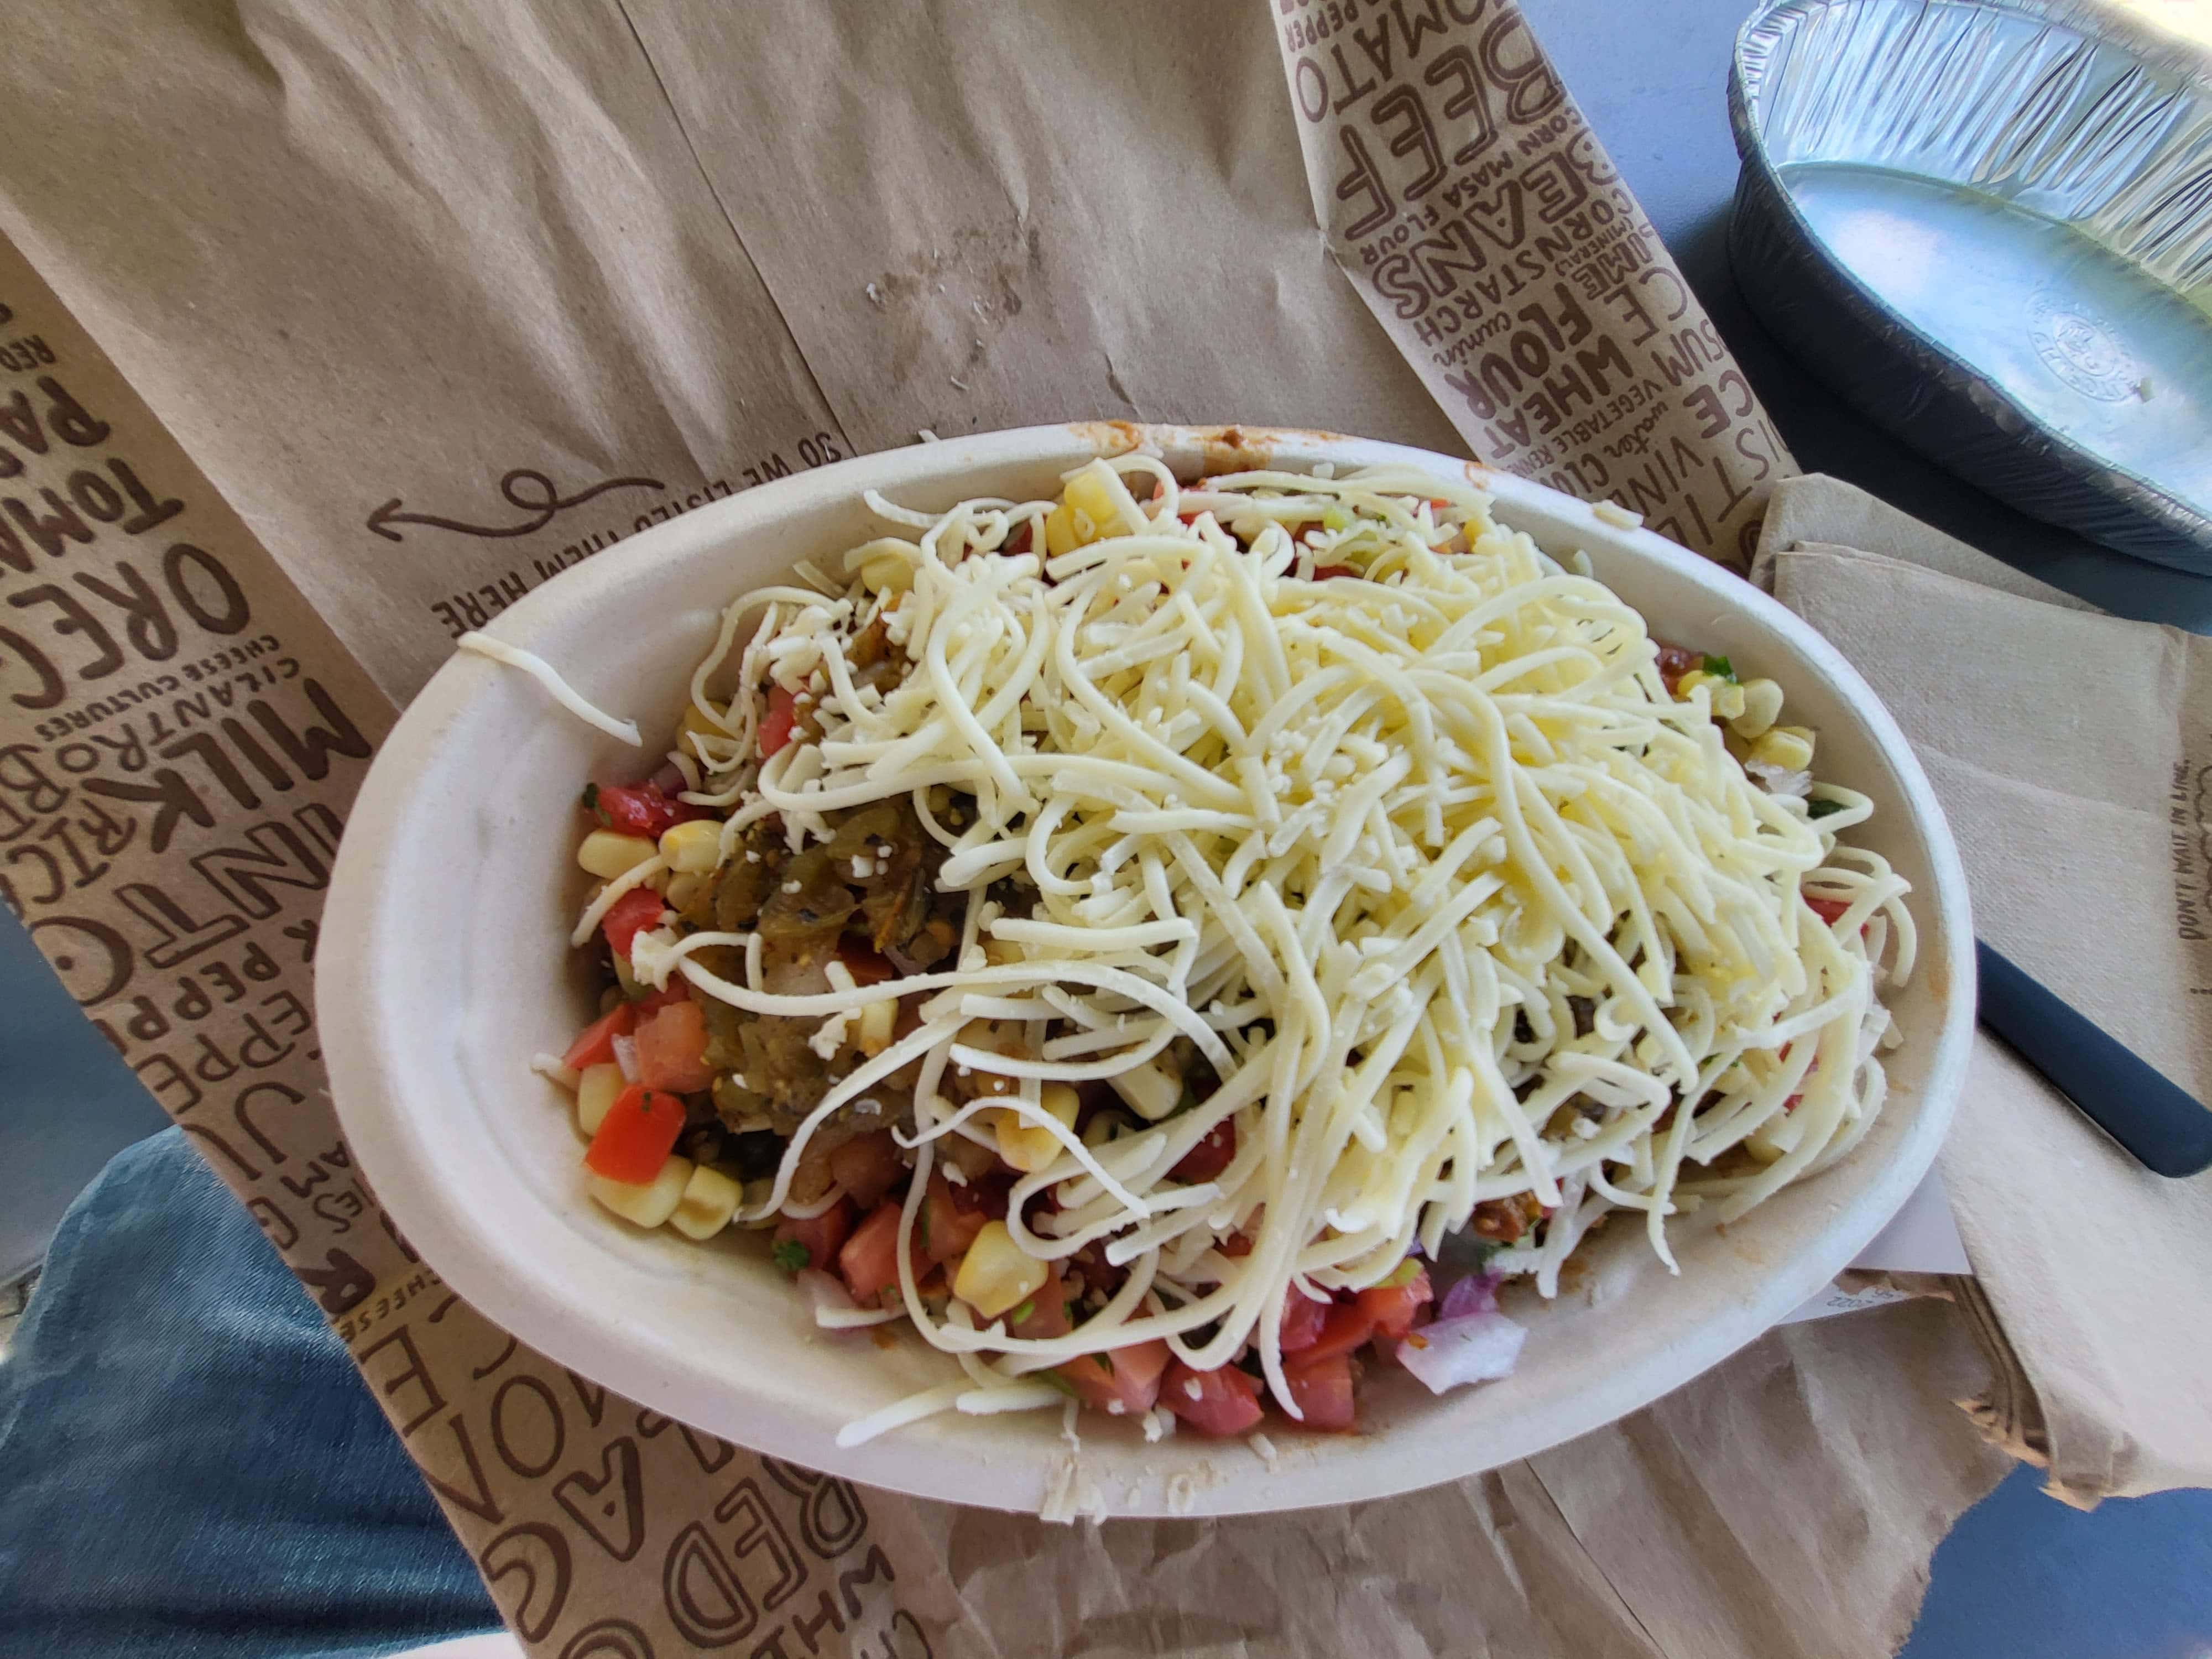 Chipotle Mexican Grill - Glastonbury (CT 06033), US, mexican dinners